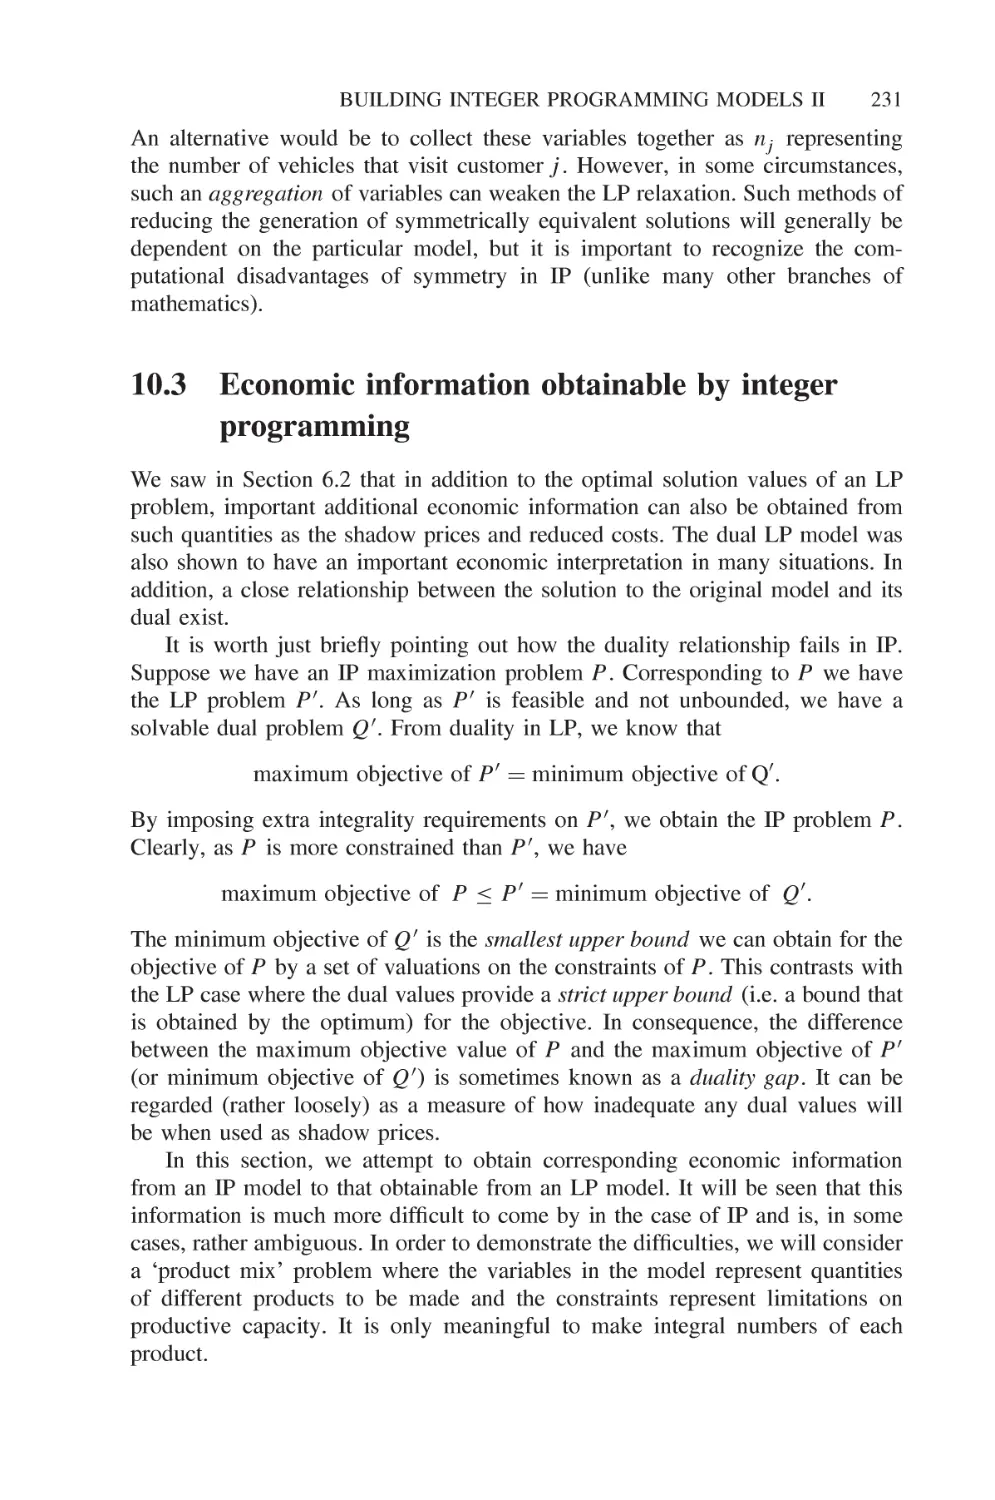 10.3 Economic information obtainable by integer programming